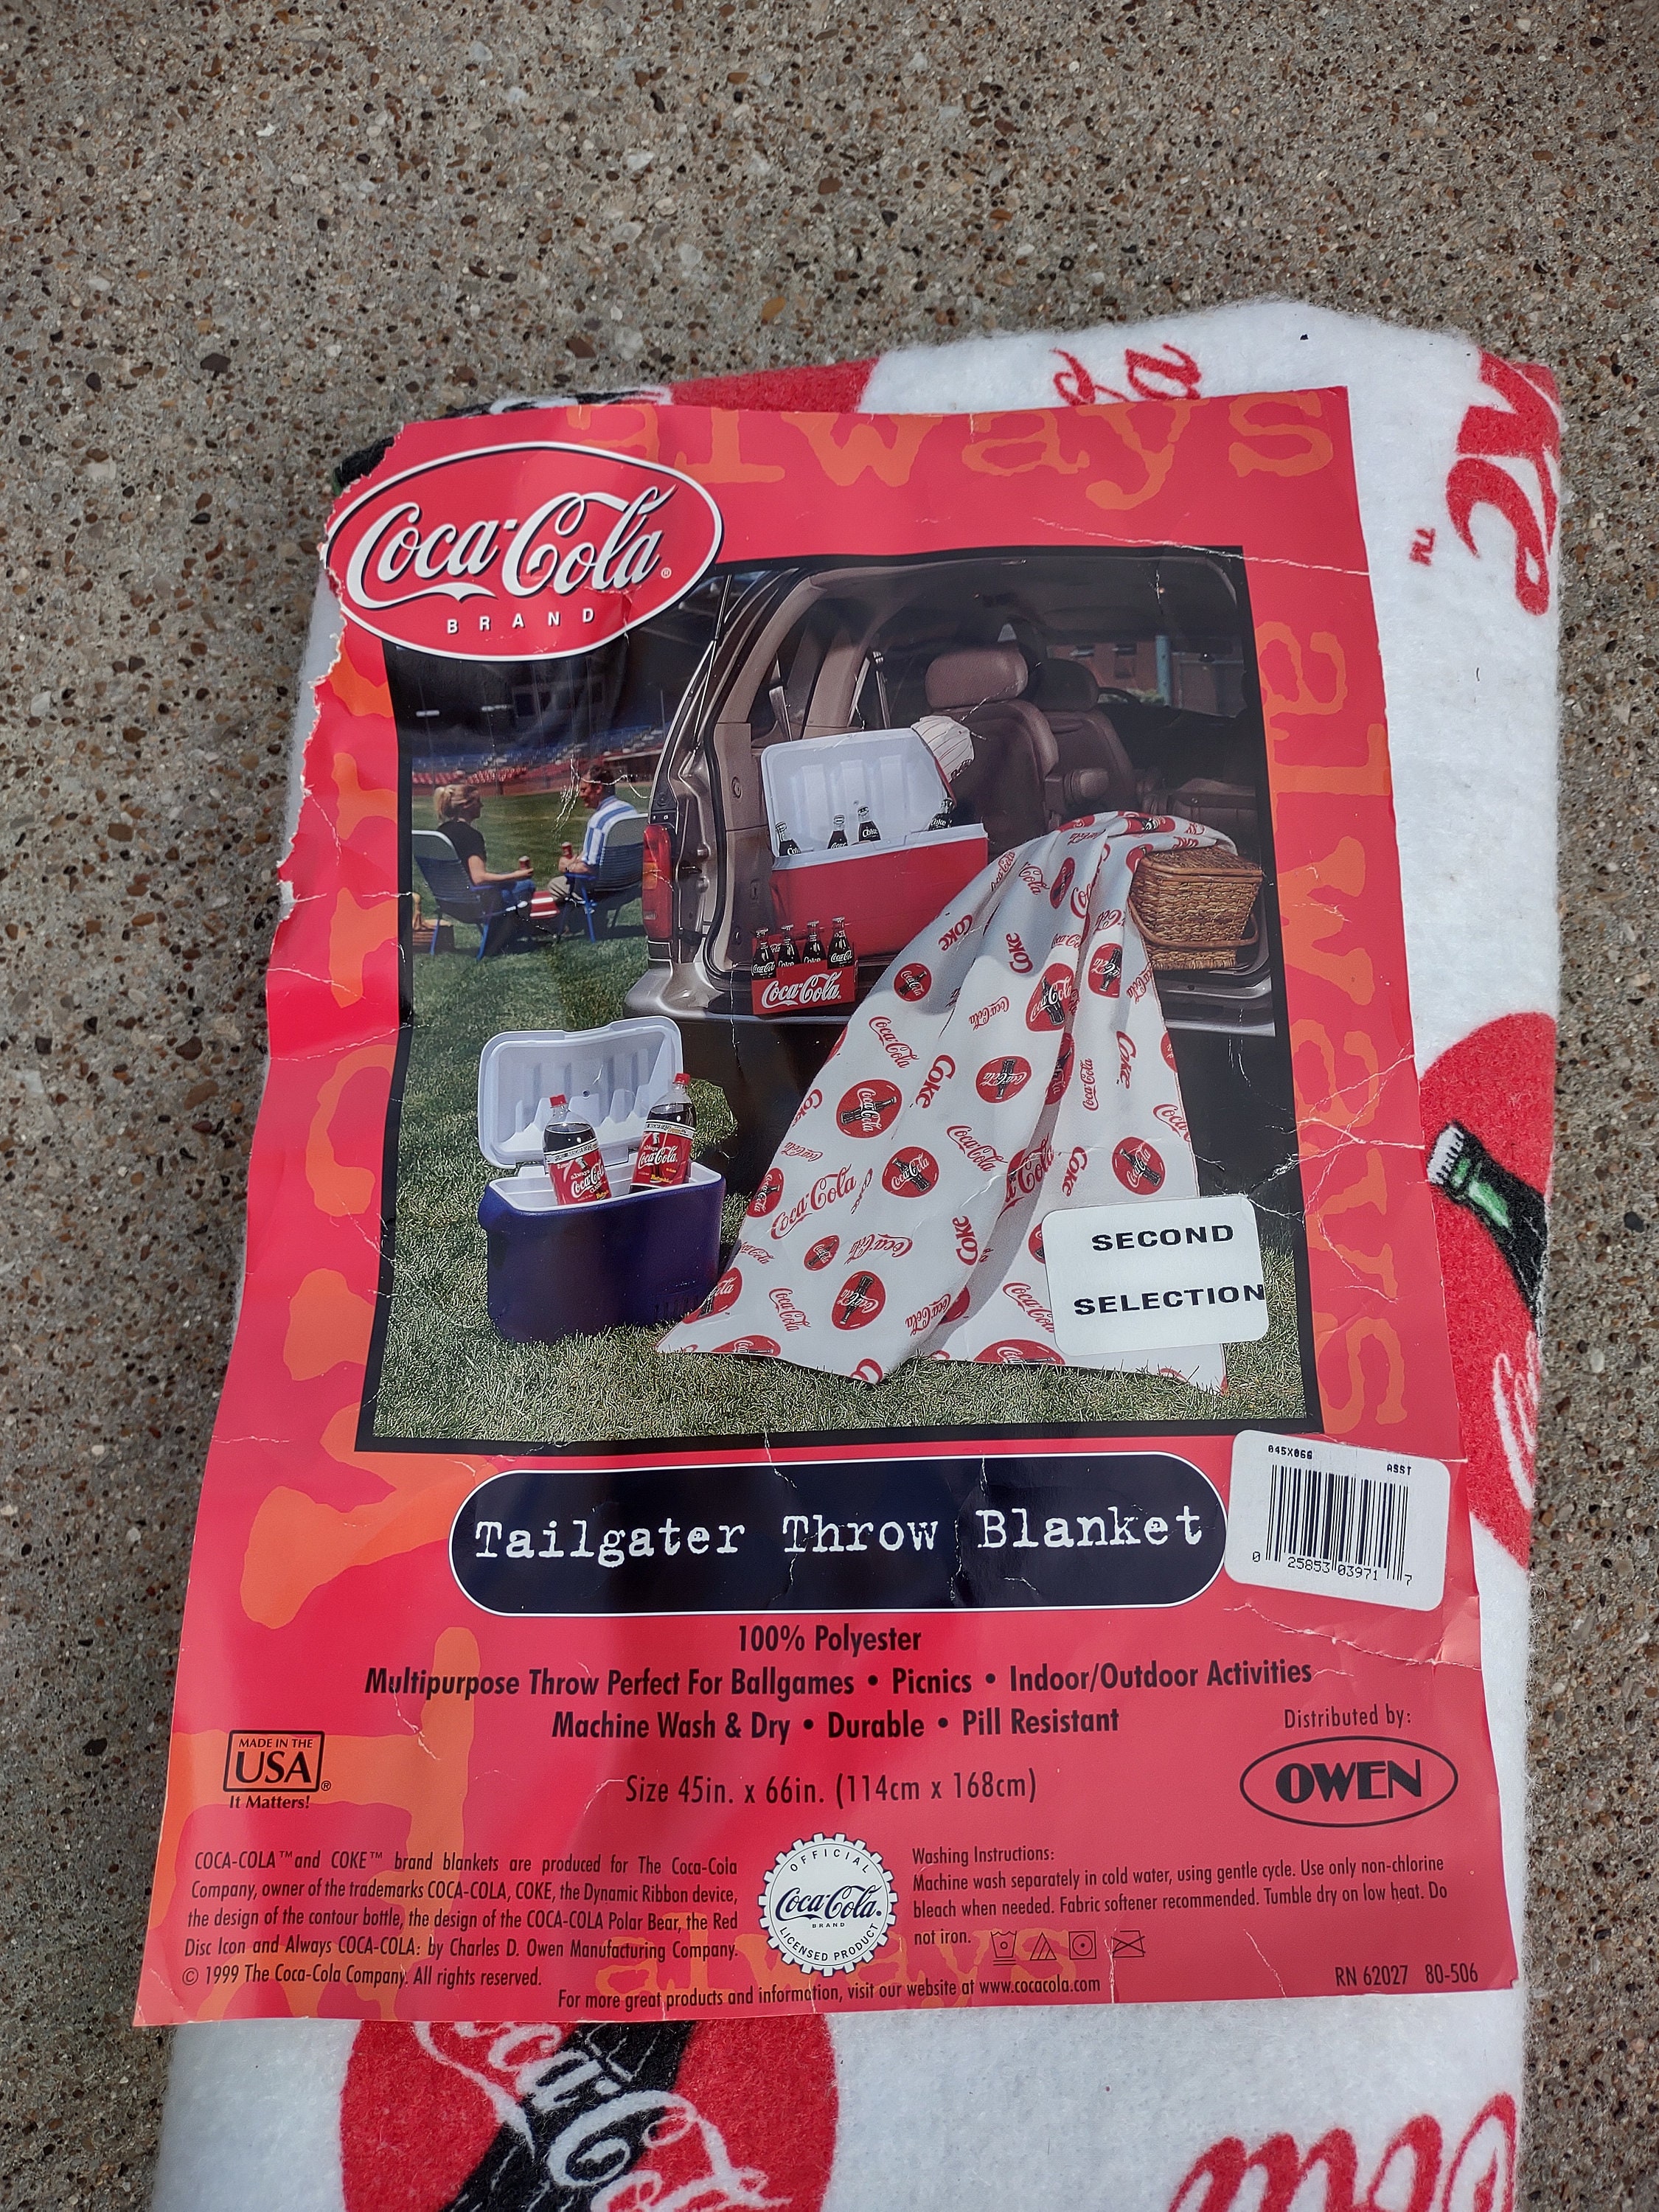 Coca Cola Knitted Throw Blanket Tapestry Wall Hanger w/Fringe 60